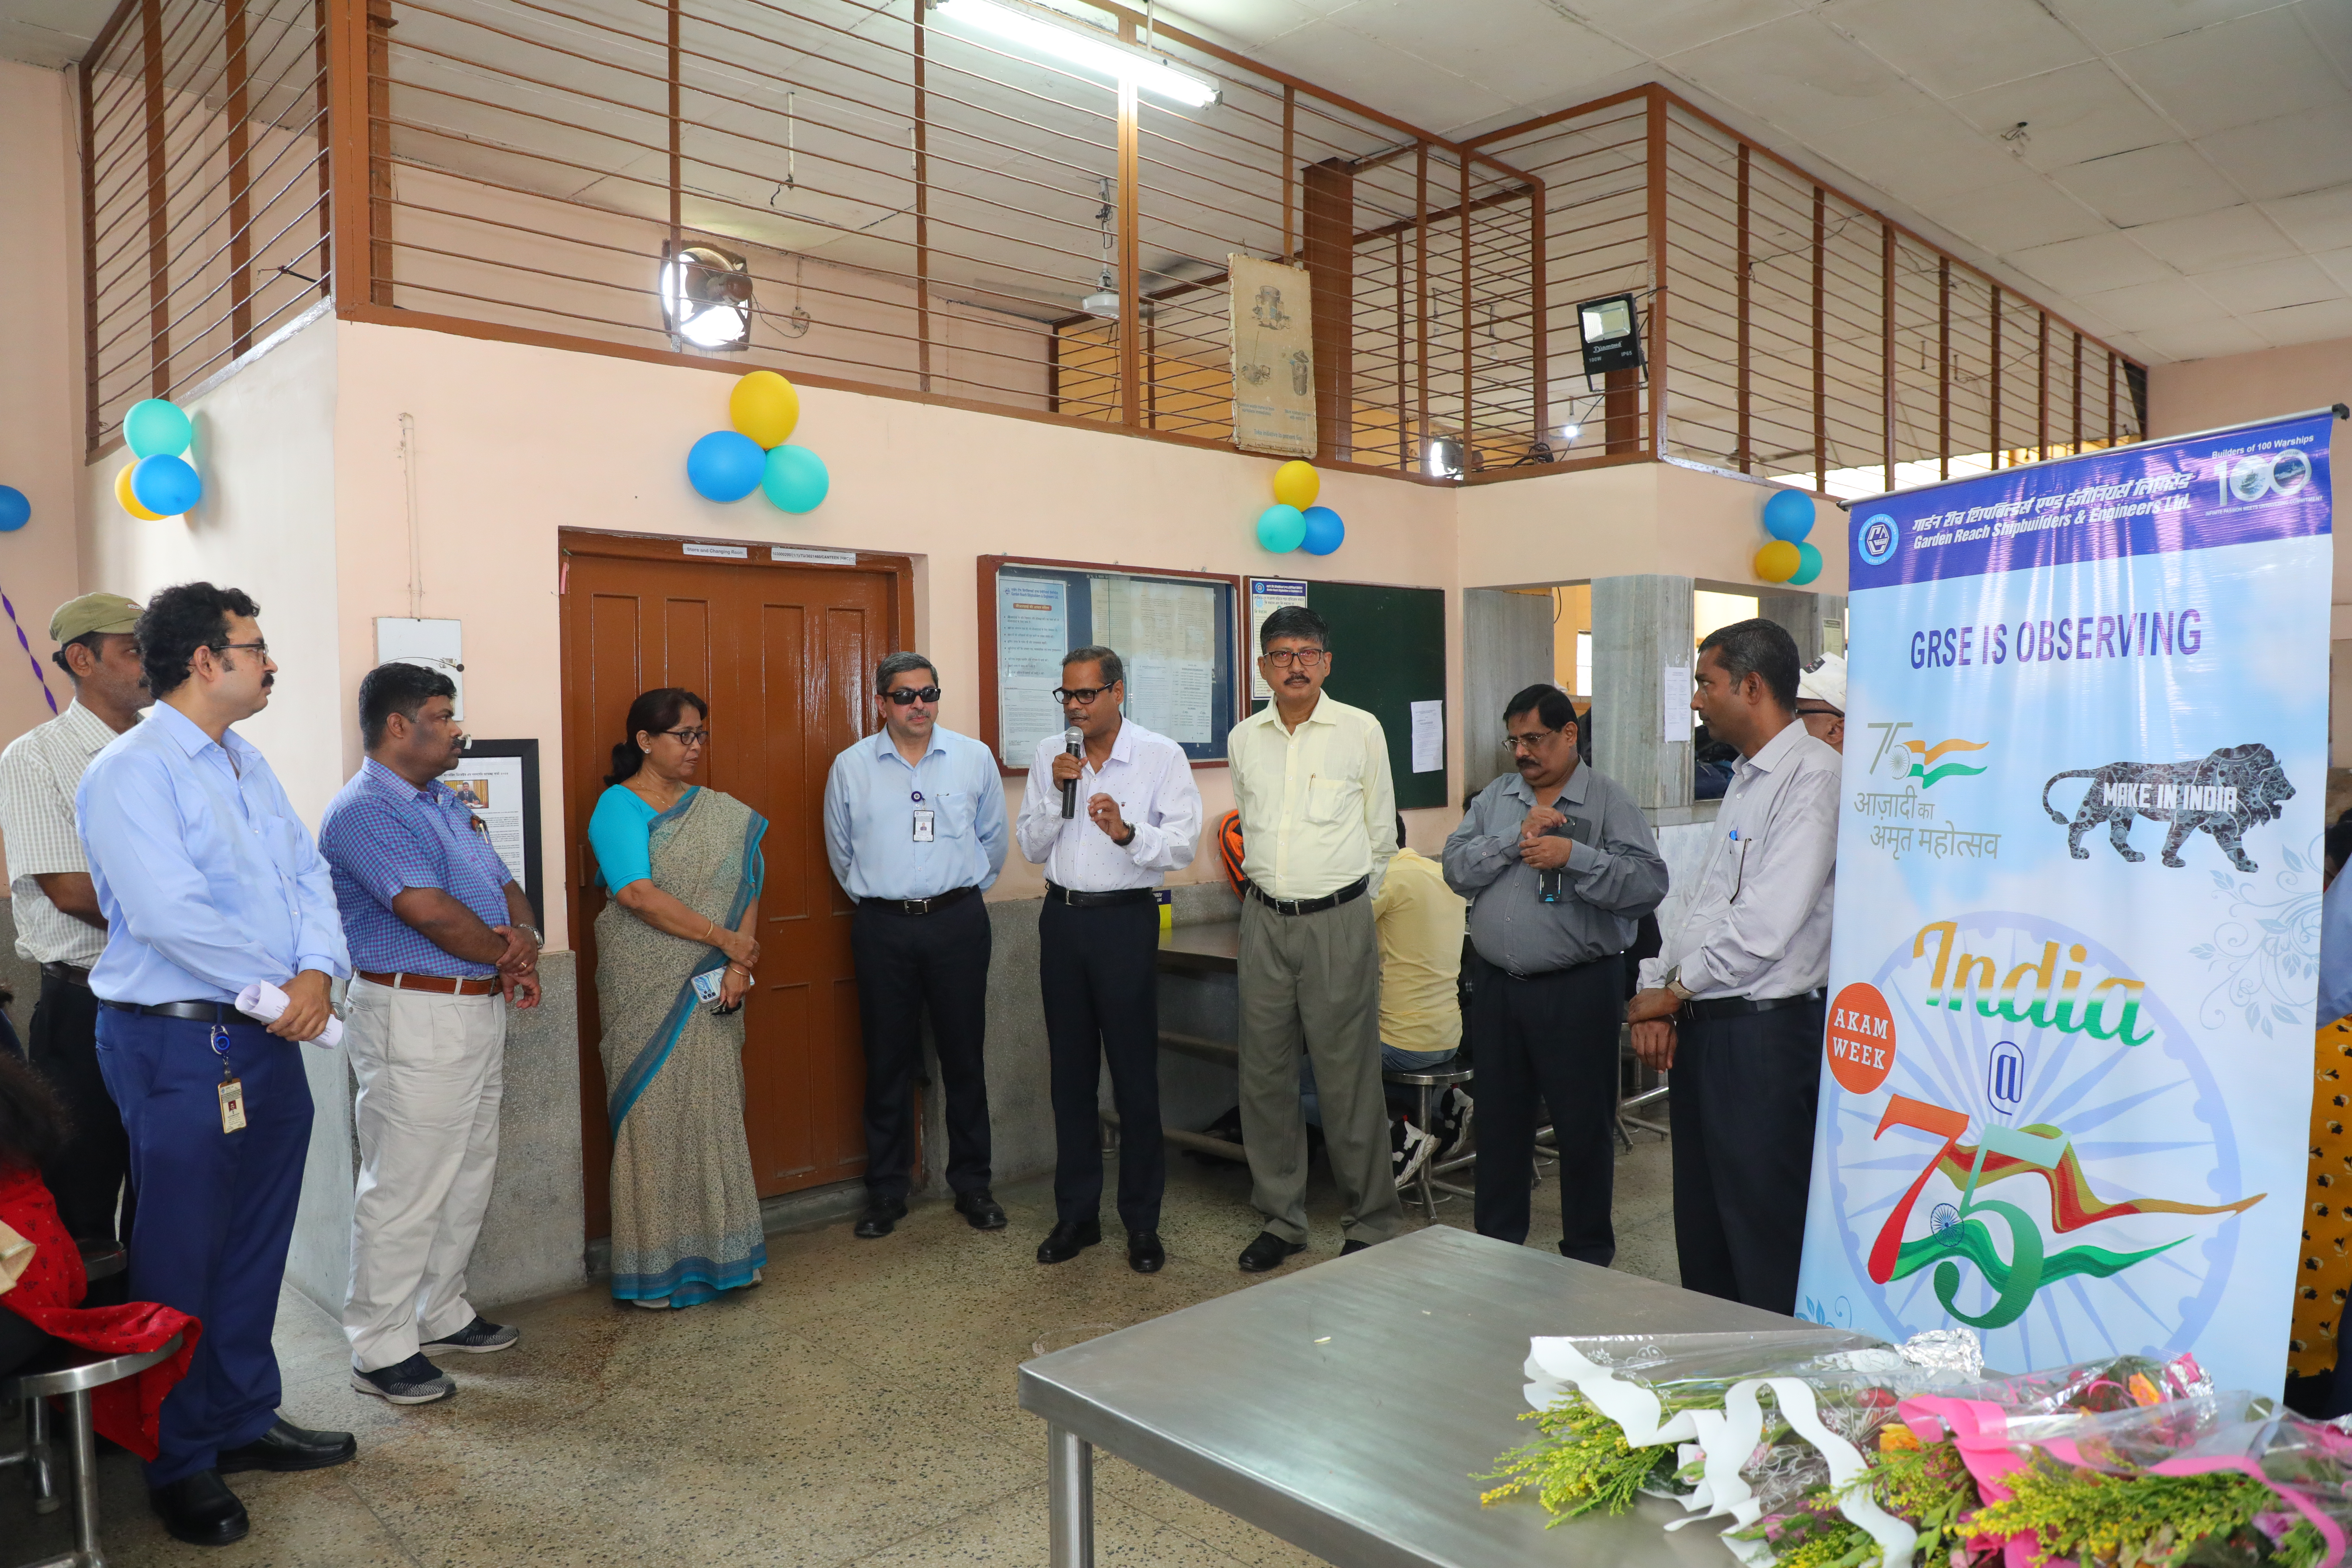 GRSE commences World Environment Day 2023 celebration with Poster Competition by Apprentices at TU, in the august presence of Director (Finance), GRSE on 27 May 23